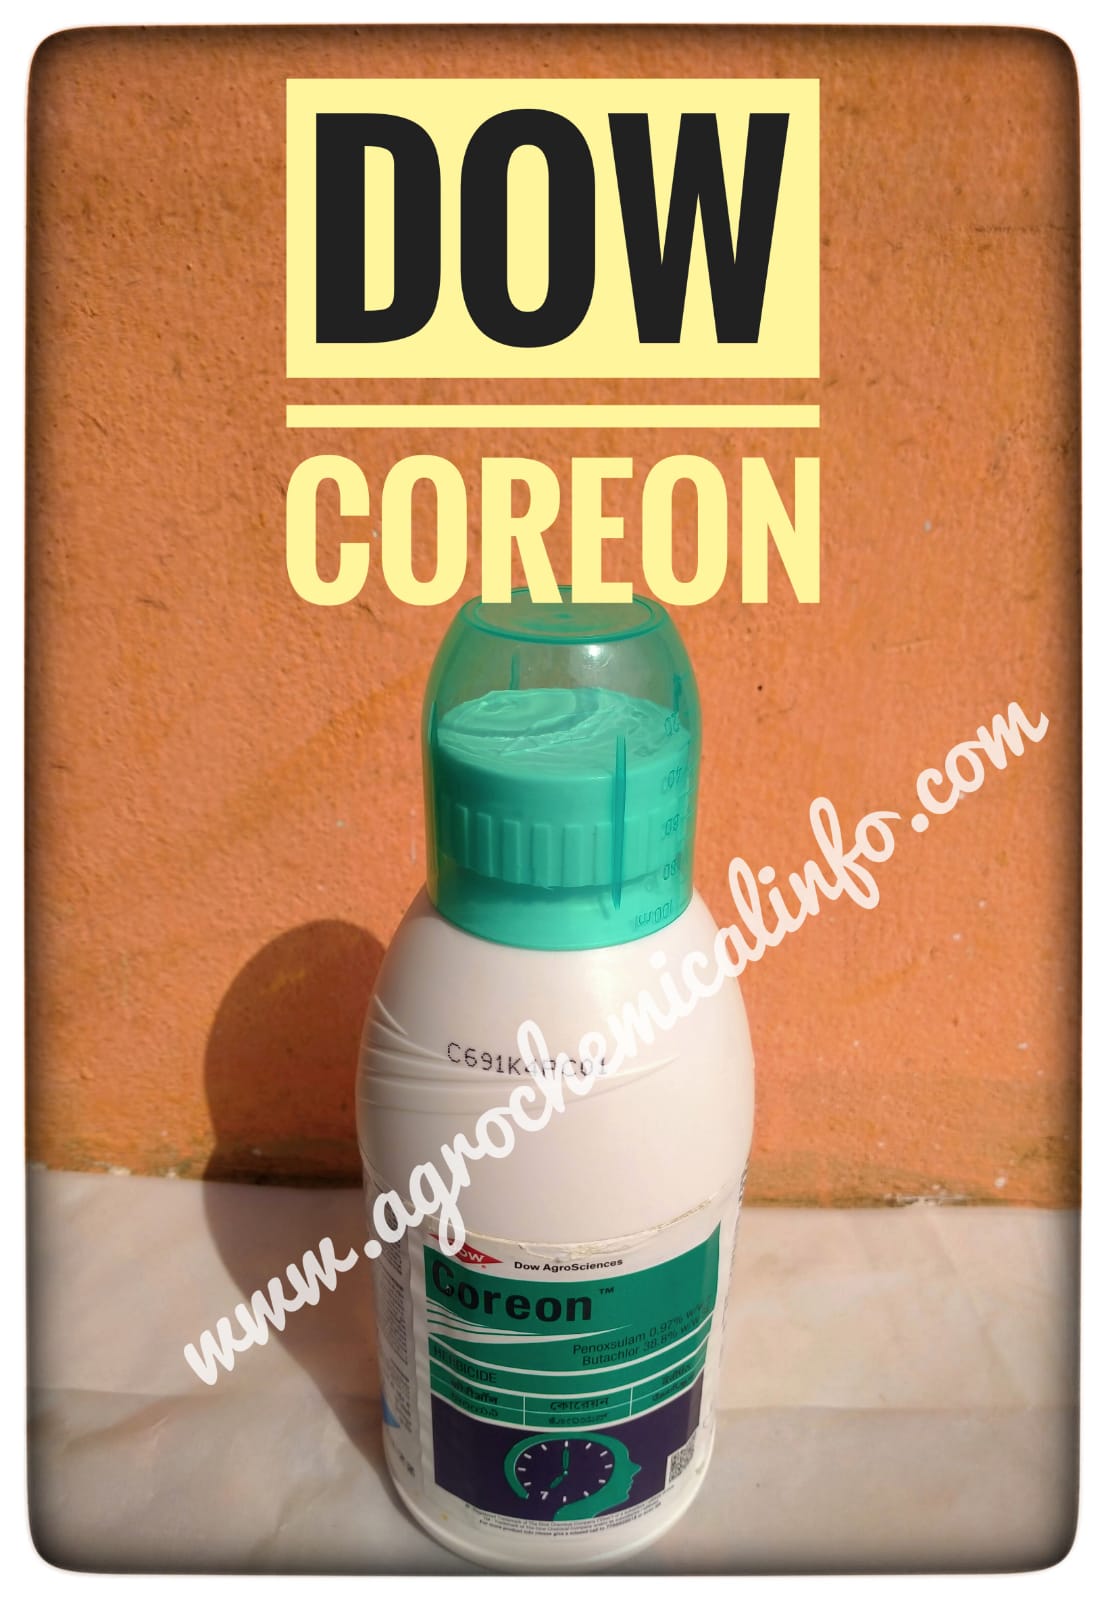 Dow Coreon for Weeds